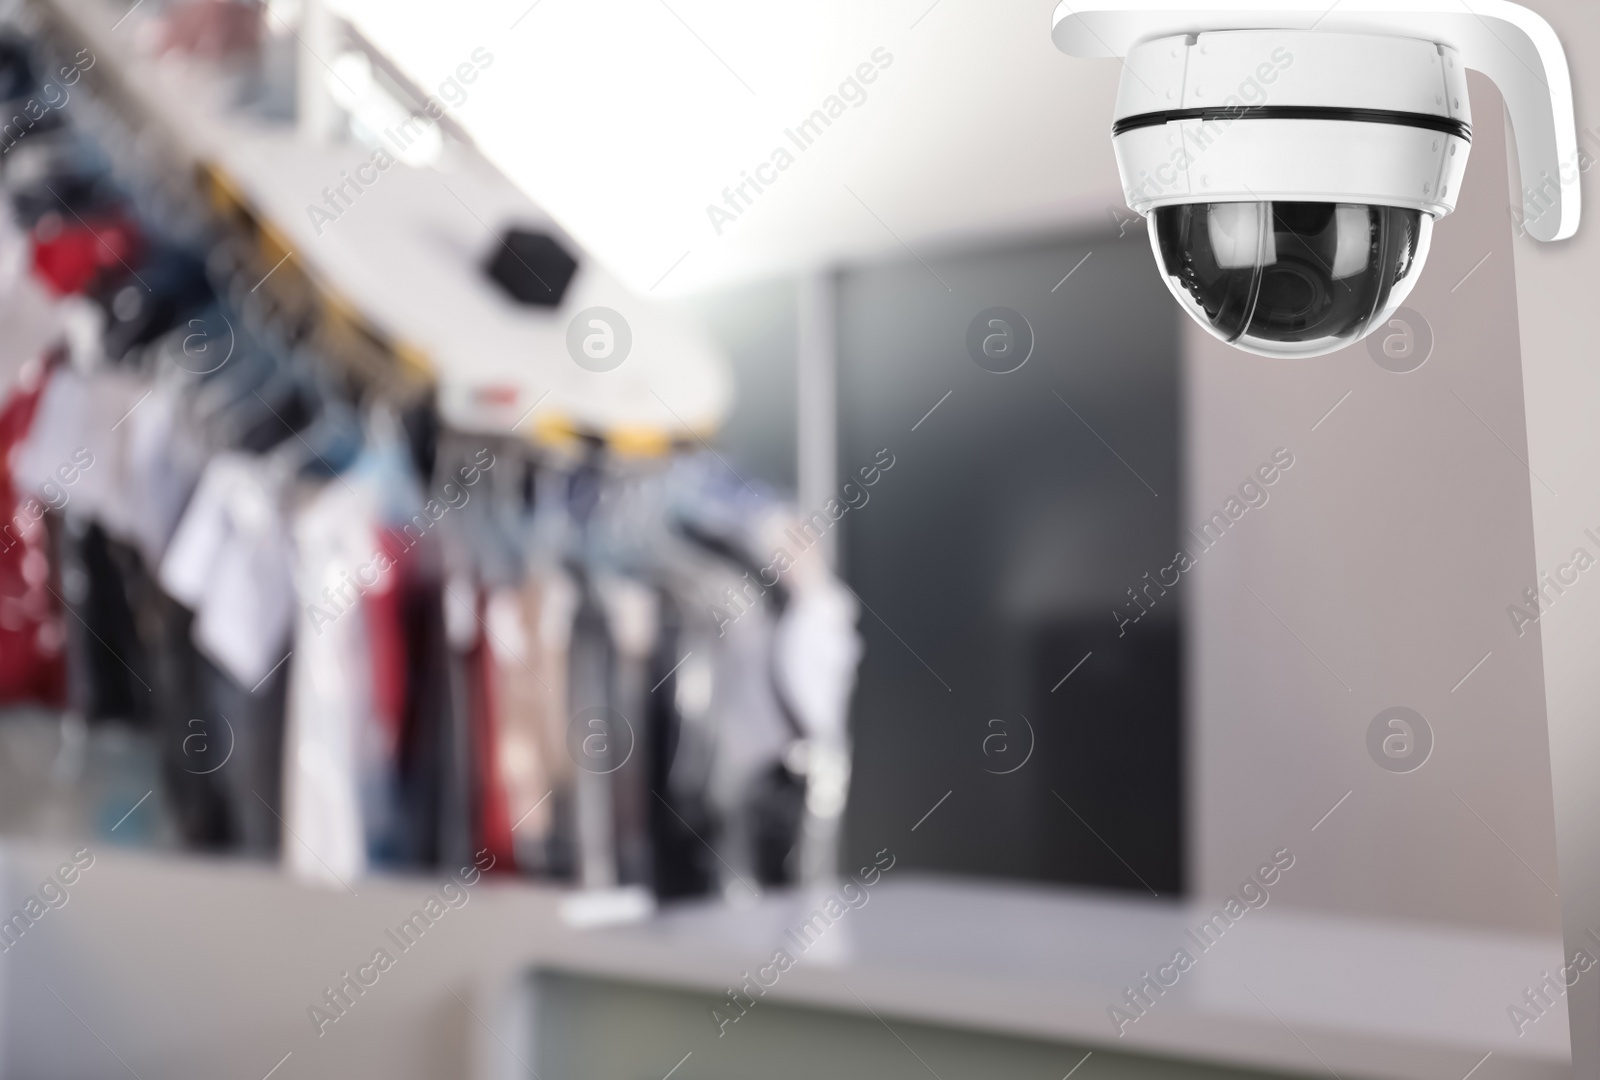 Image of Modern CCTV security camera at dry-cleaner's. Guard equipment